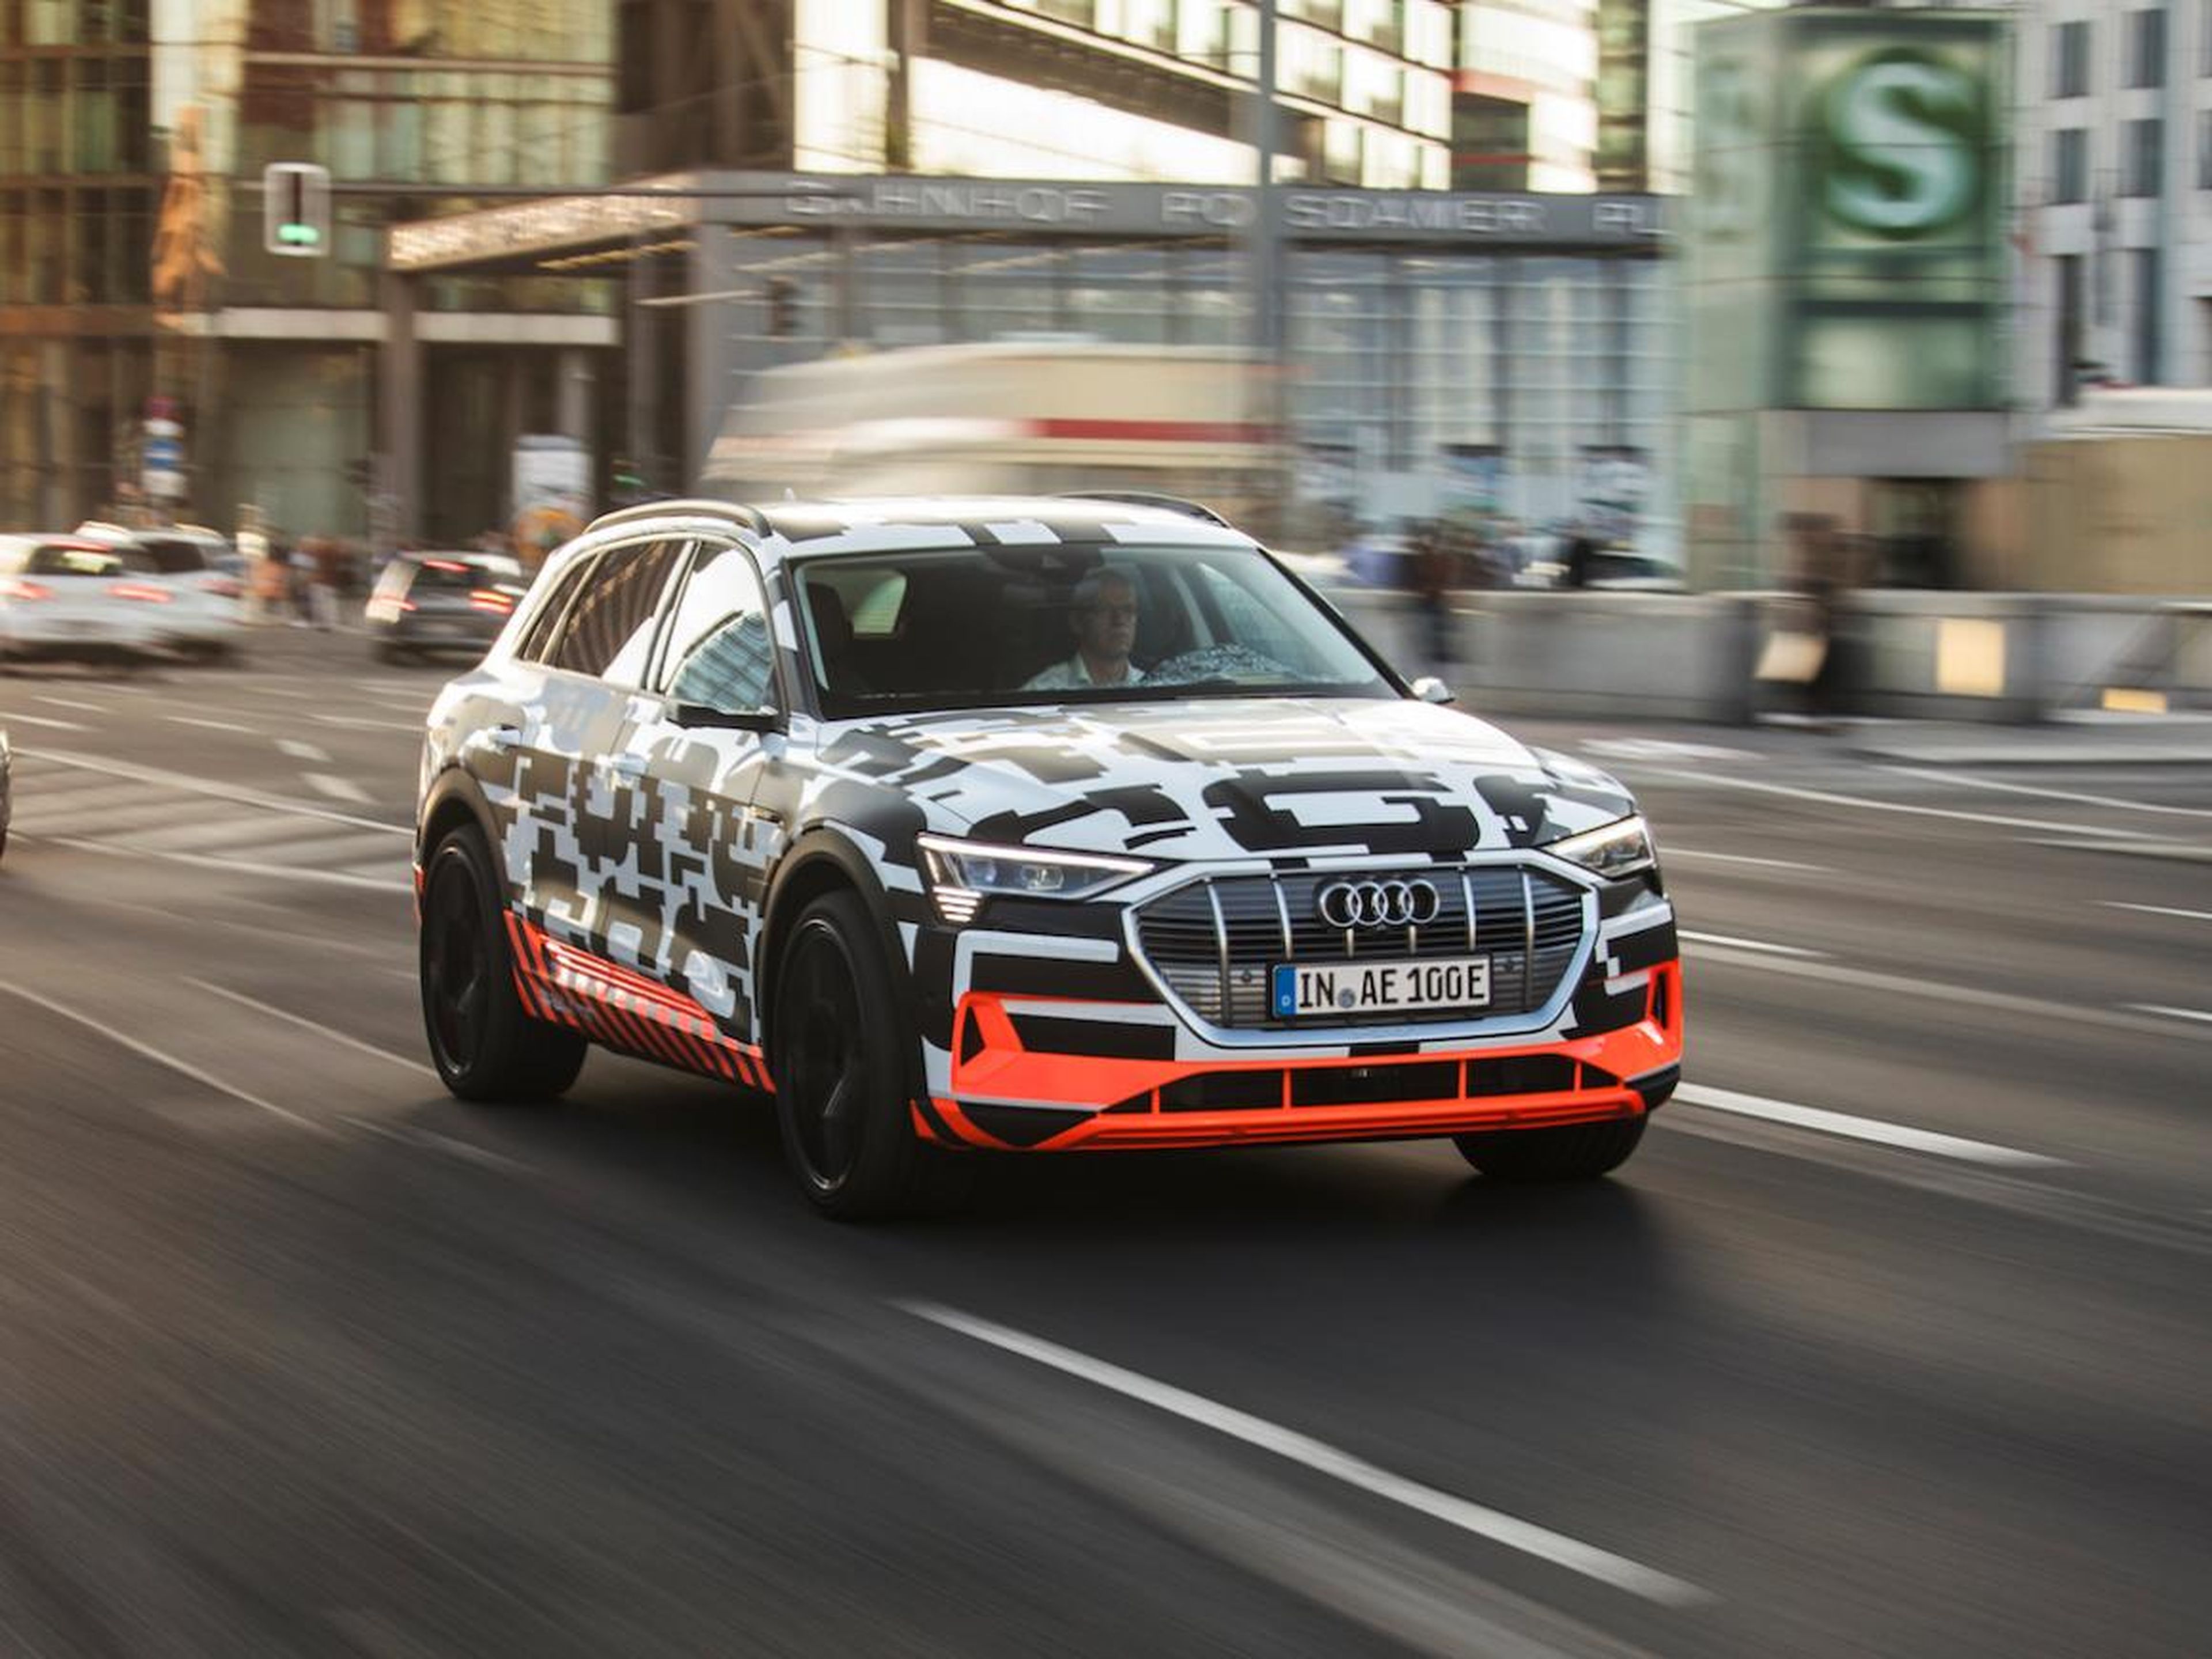 Audi will unveil the e-tron's production version on September 17.